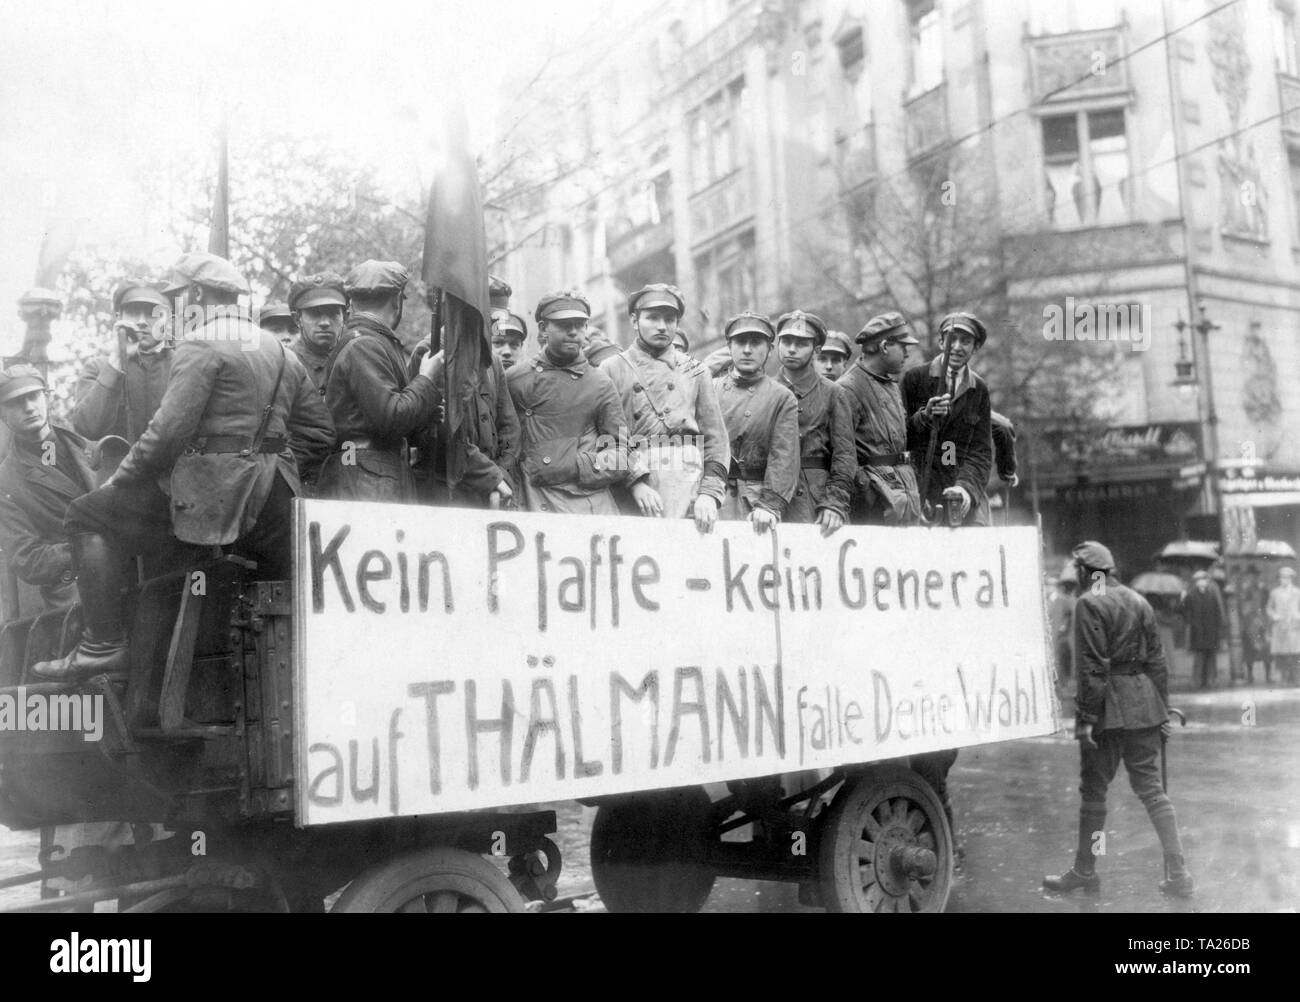 The KPD promoted its candidate, Ernst Thaelmann, for the office of the president of the Reich with the slogan "No priests - no generals, vote for Thalmann". The opponents were Wilhelm Marx for the Centre and former Field Marshal General, Paul von Hindenburg. Stock Photo